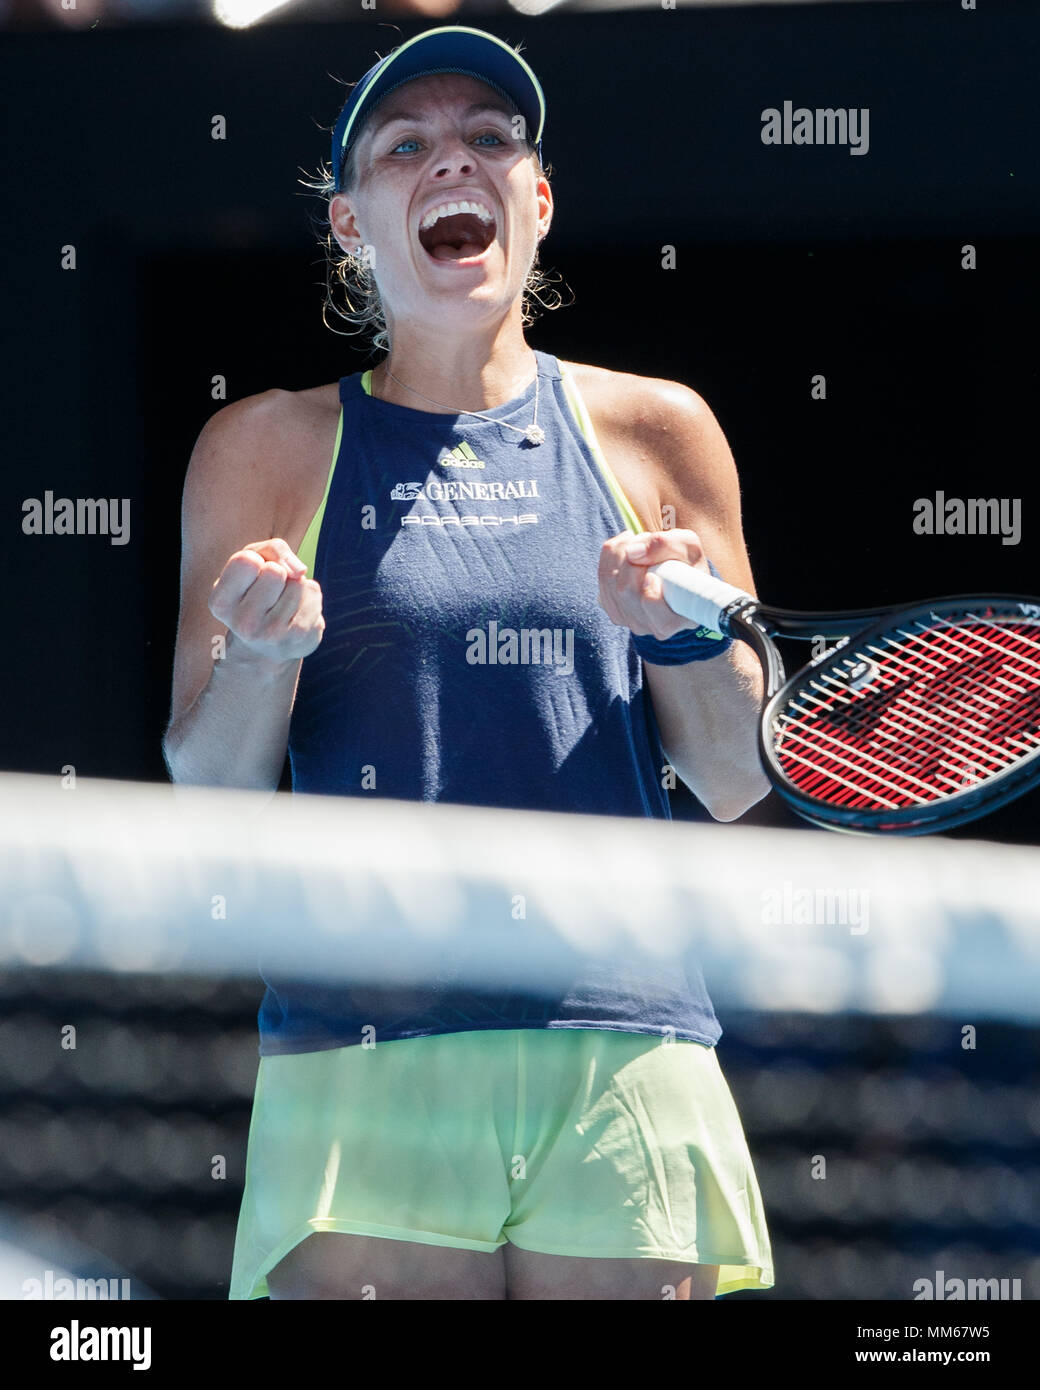 German Angelique Kerber making a fist and cheering during women's singles match in Australian Open 2018 Tennis Tournament, Melbourne Par Stock Photo - Alamy